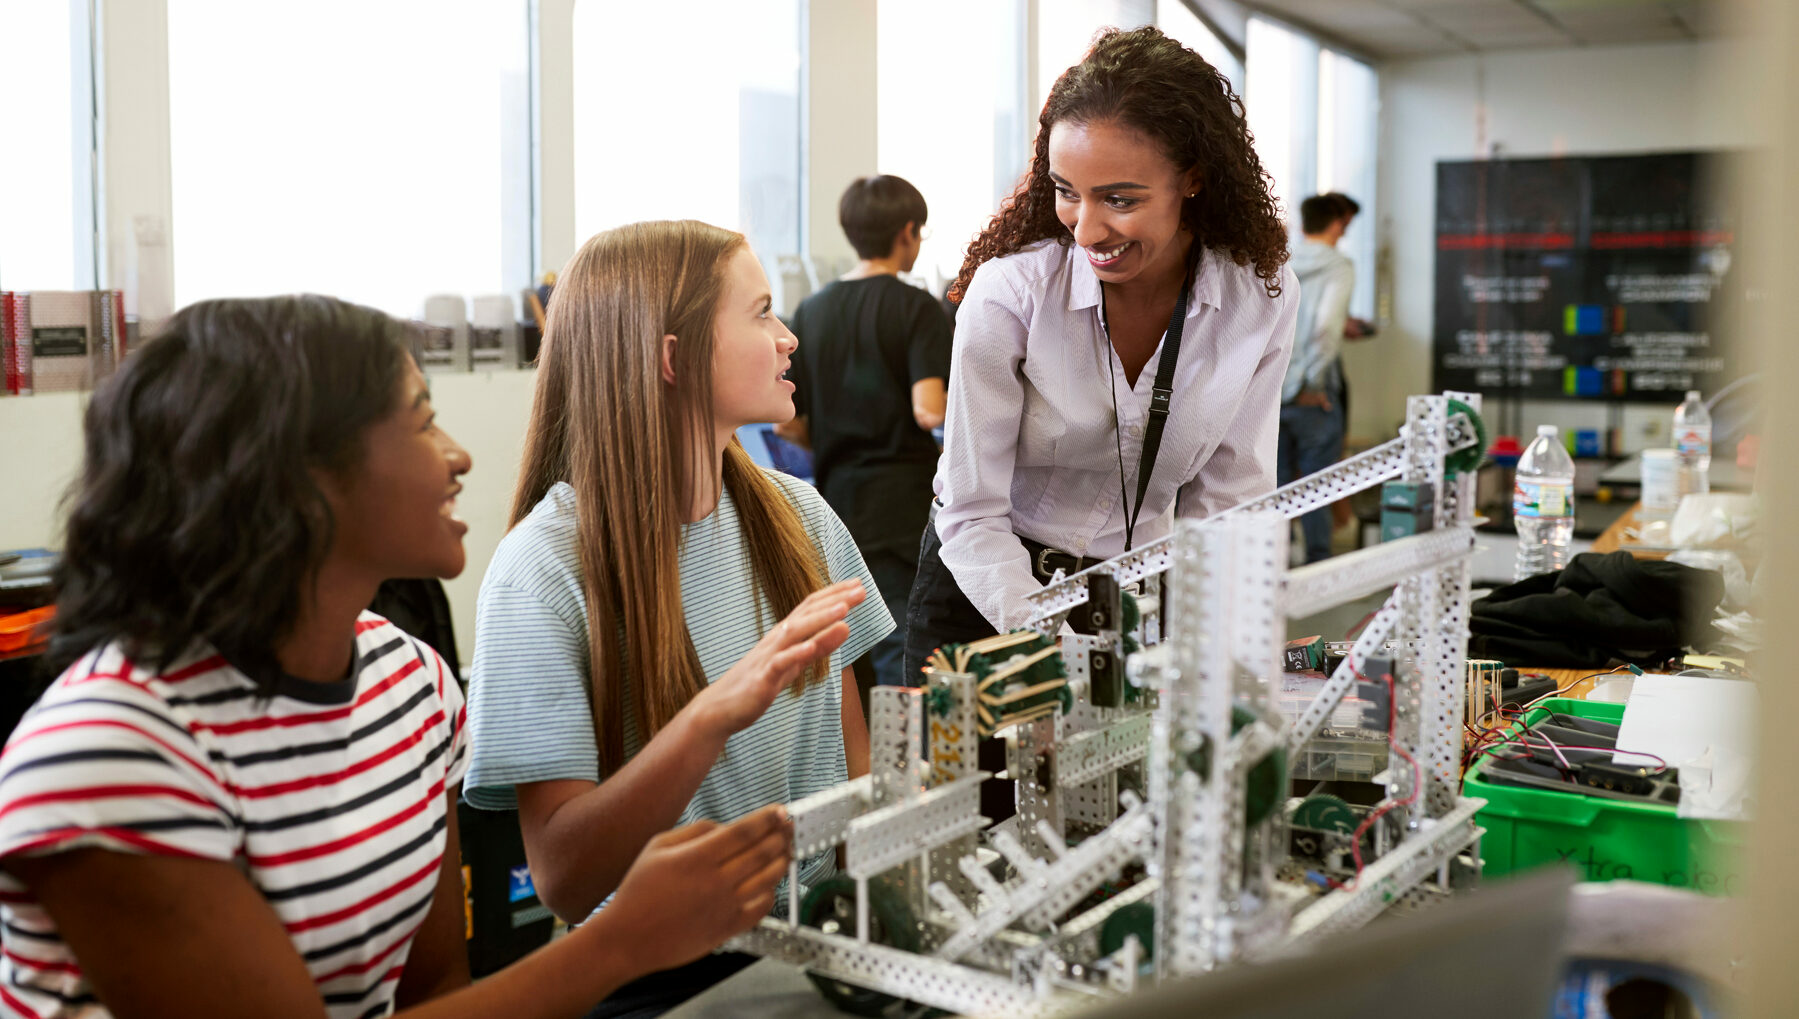 Woman Teacher With Female College Students Building Machine In Science Robotics Or Engineering Class 2023/08/AdobeStock_254379706-e1691637365294.jpeg 